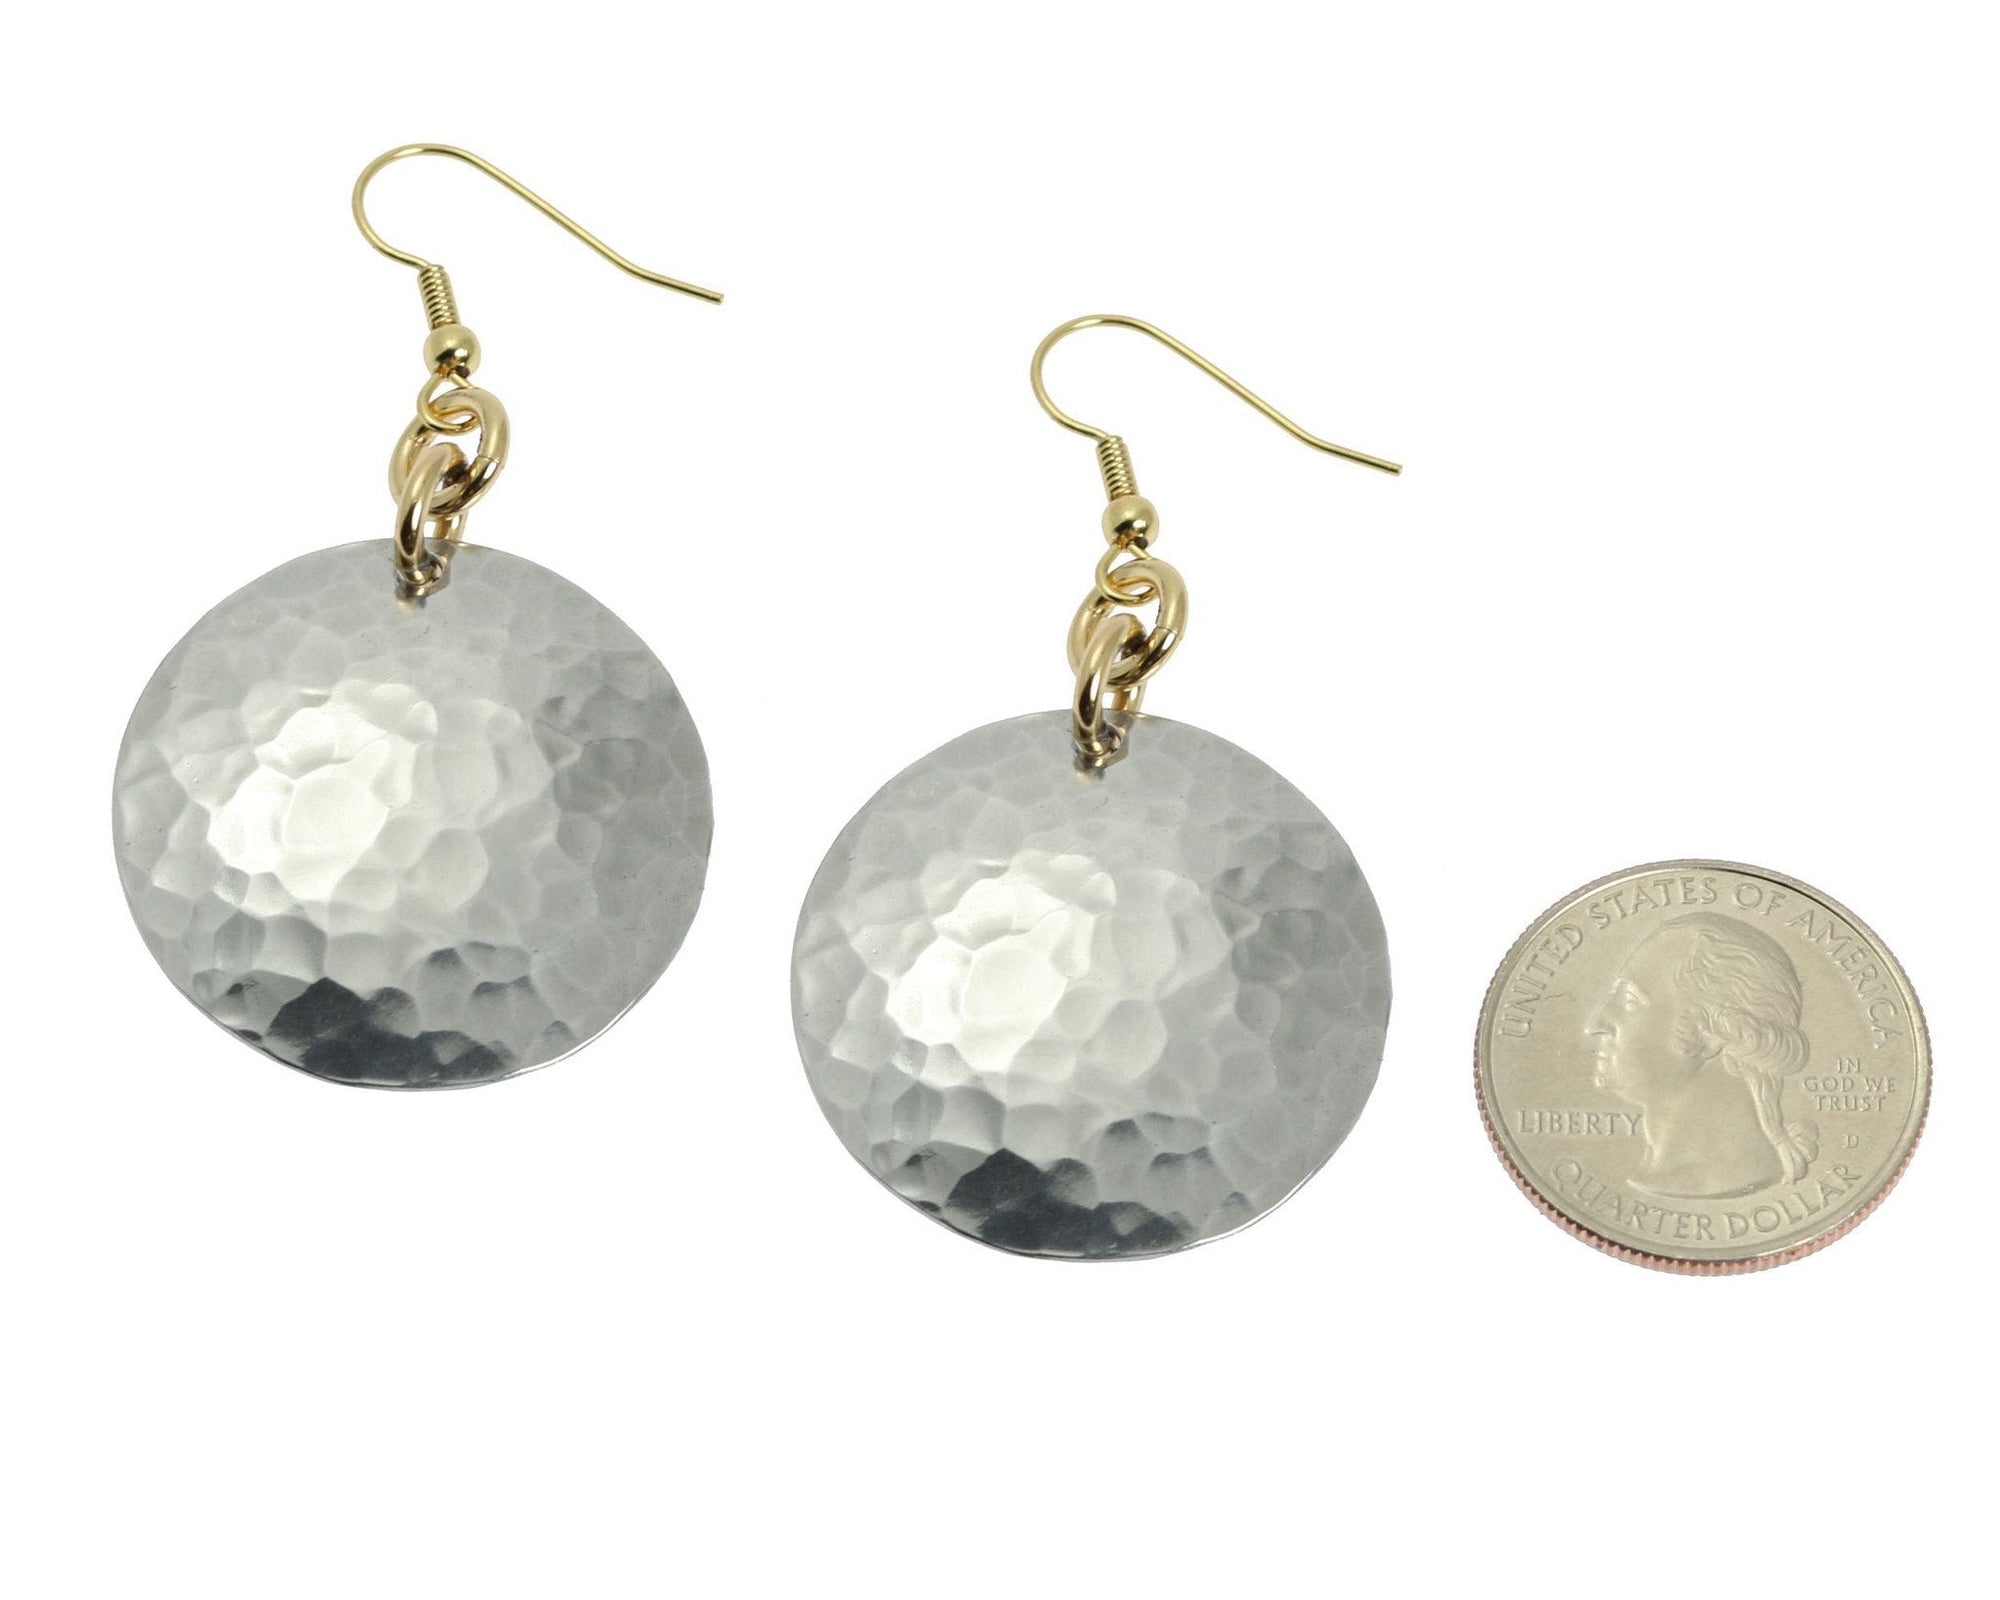 Size of Hammered Aluminum Disc Earrings